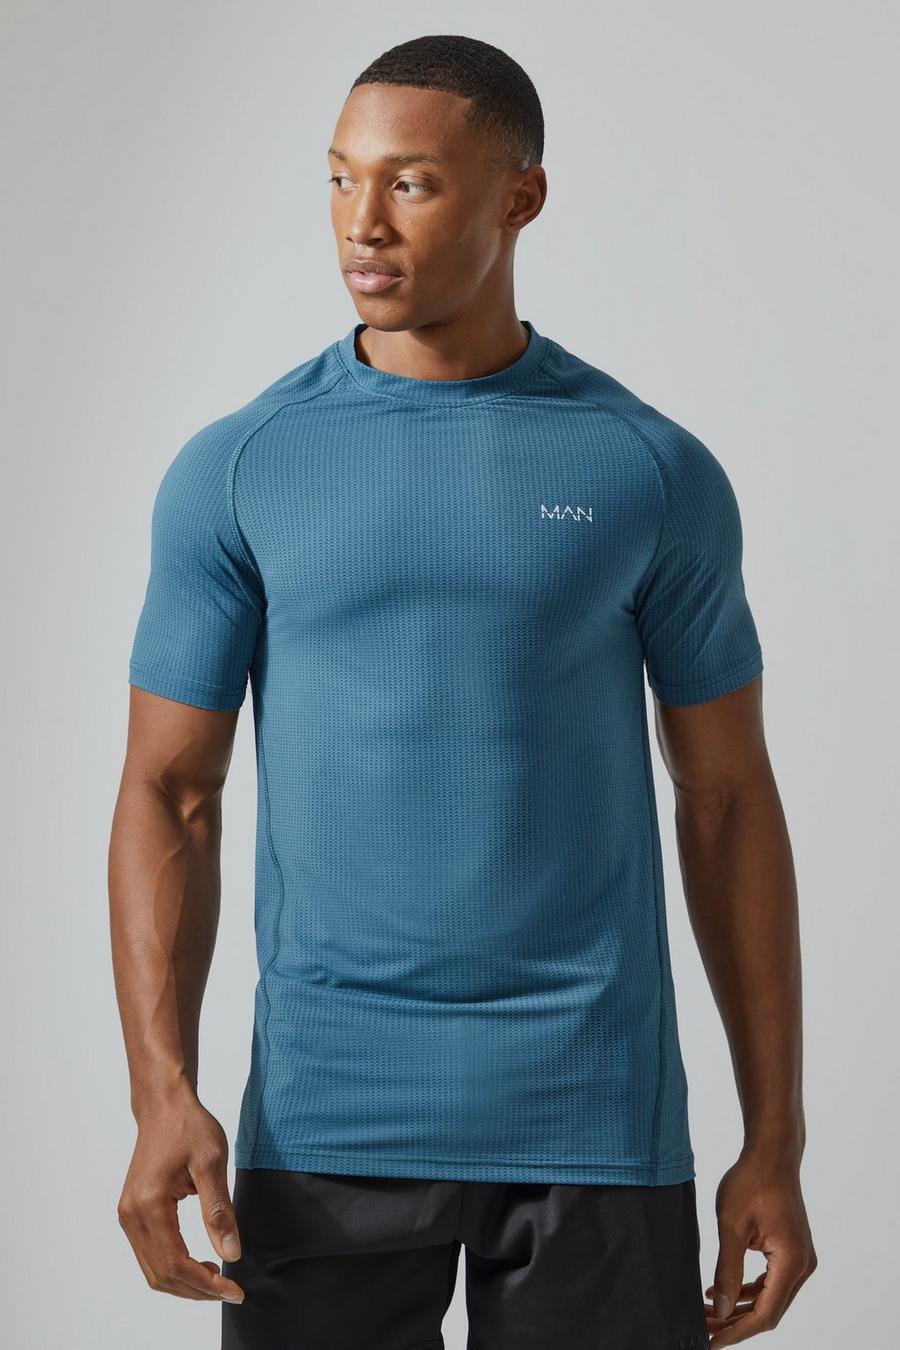 Teal Man Active Mergel Muscle Fit T-Shirt